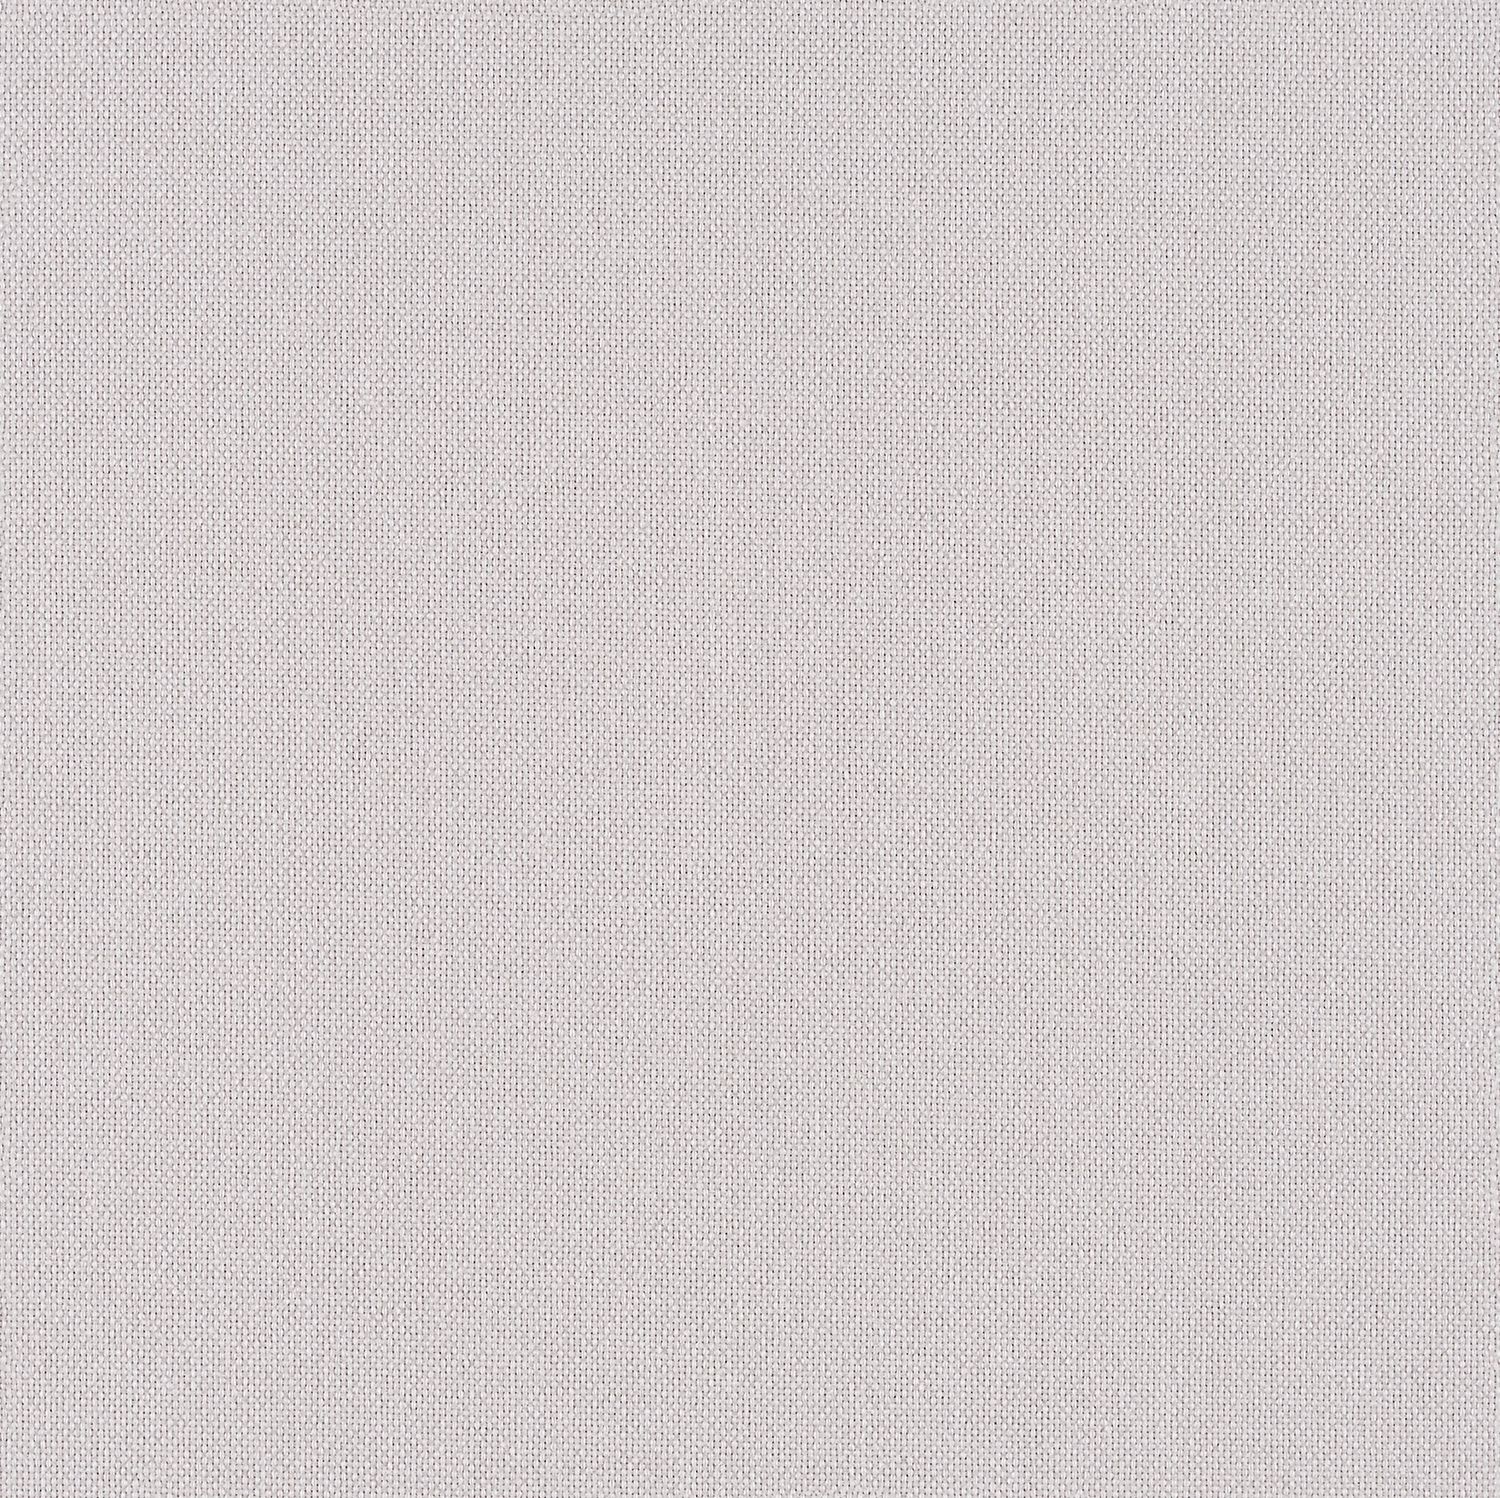 Backdrop - Fog - 1027 - 02 Tileable Swatches